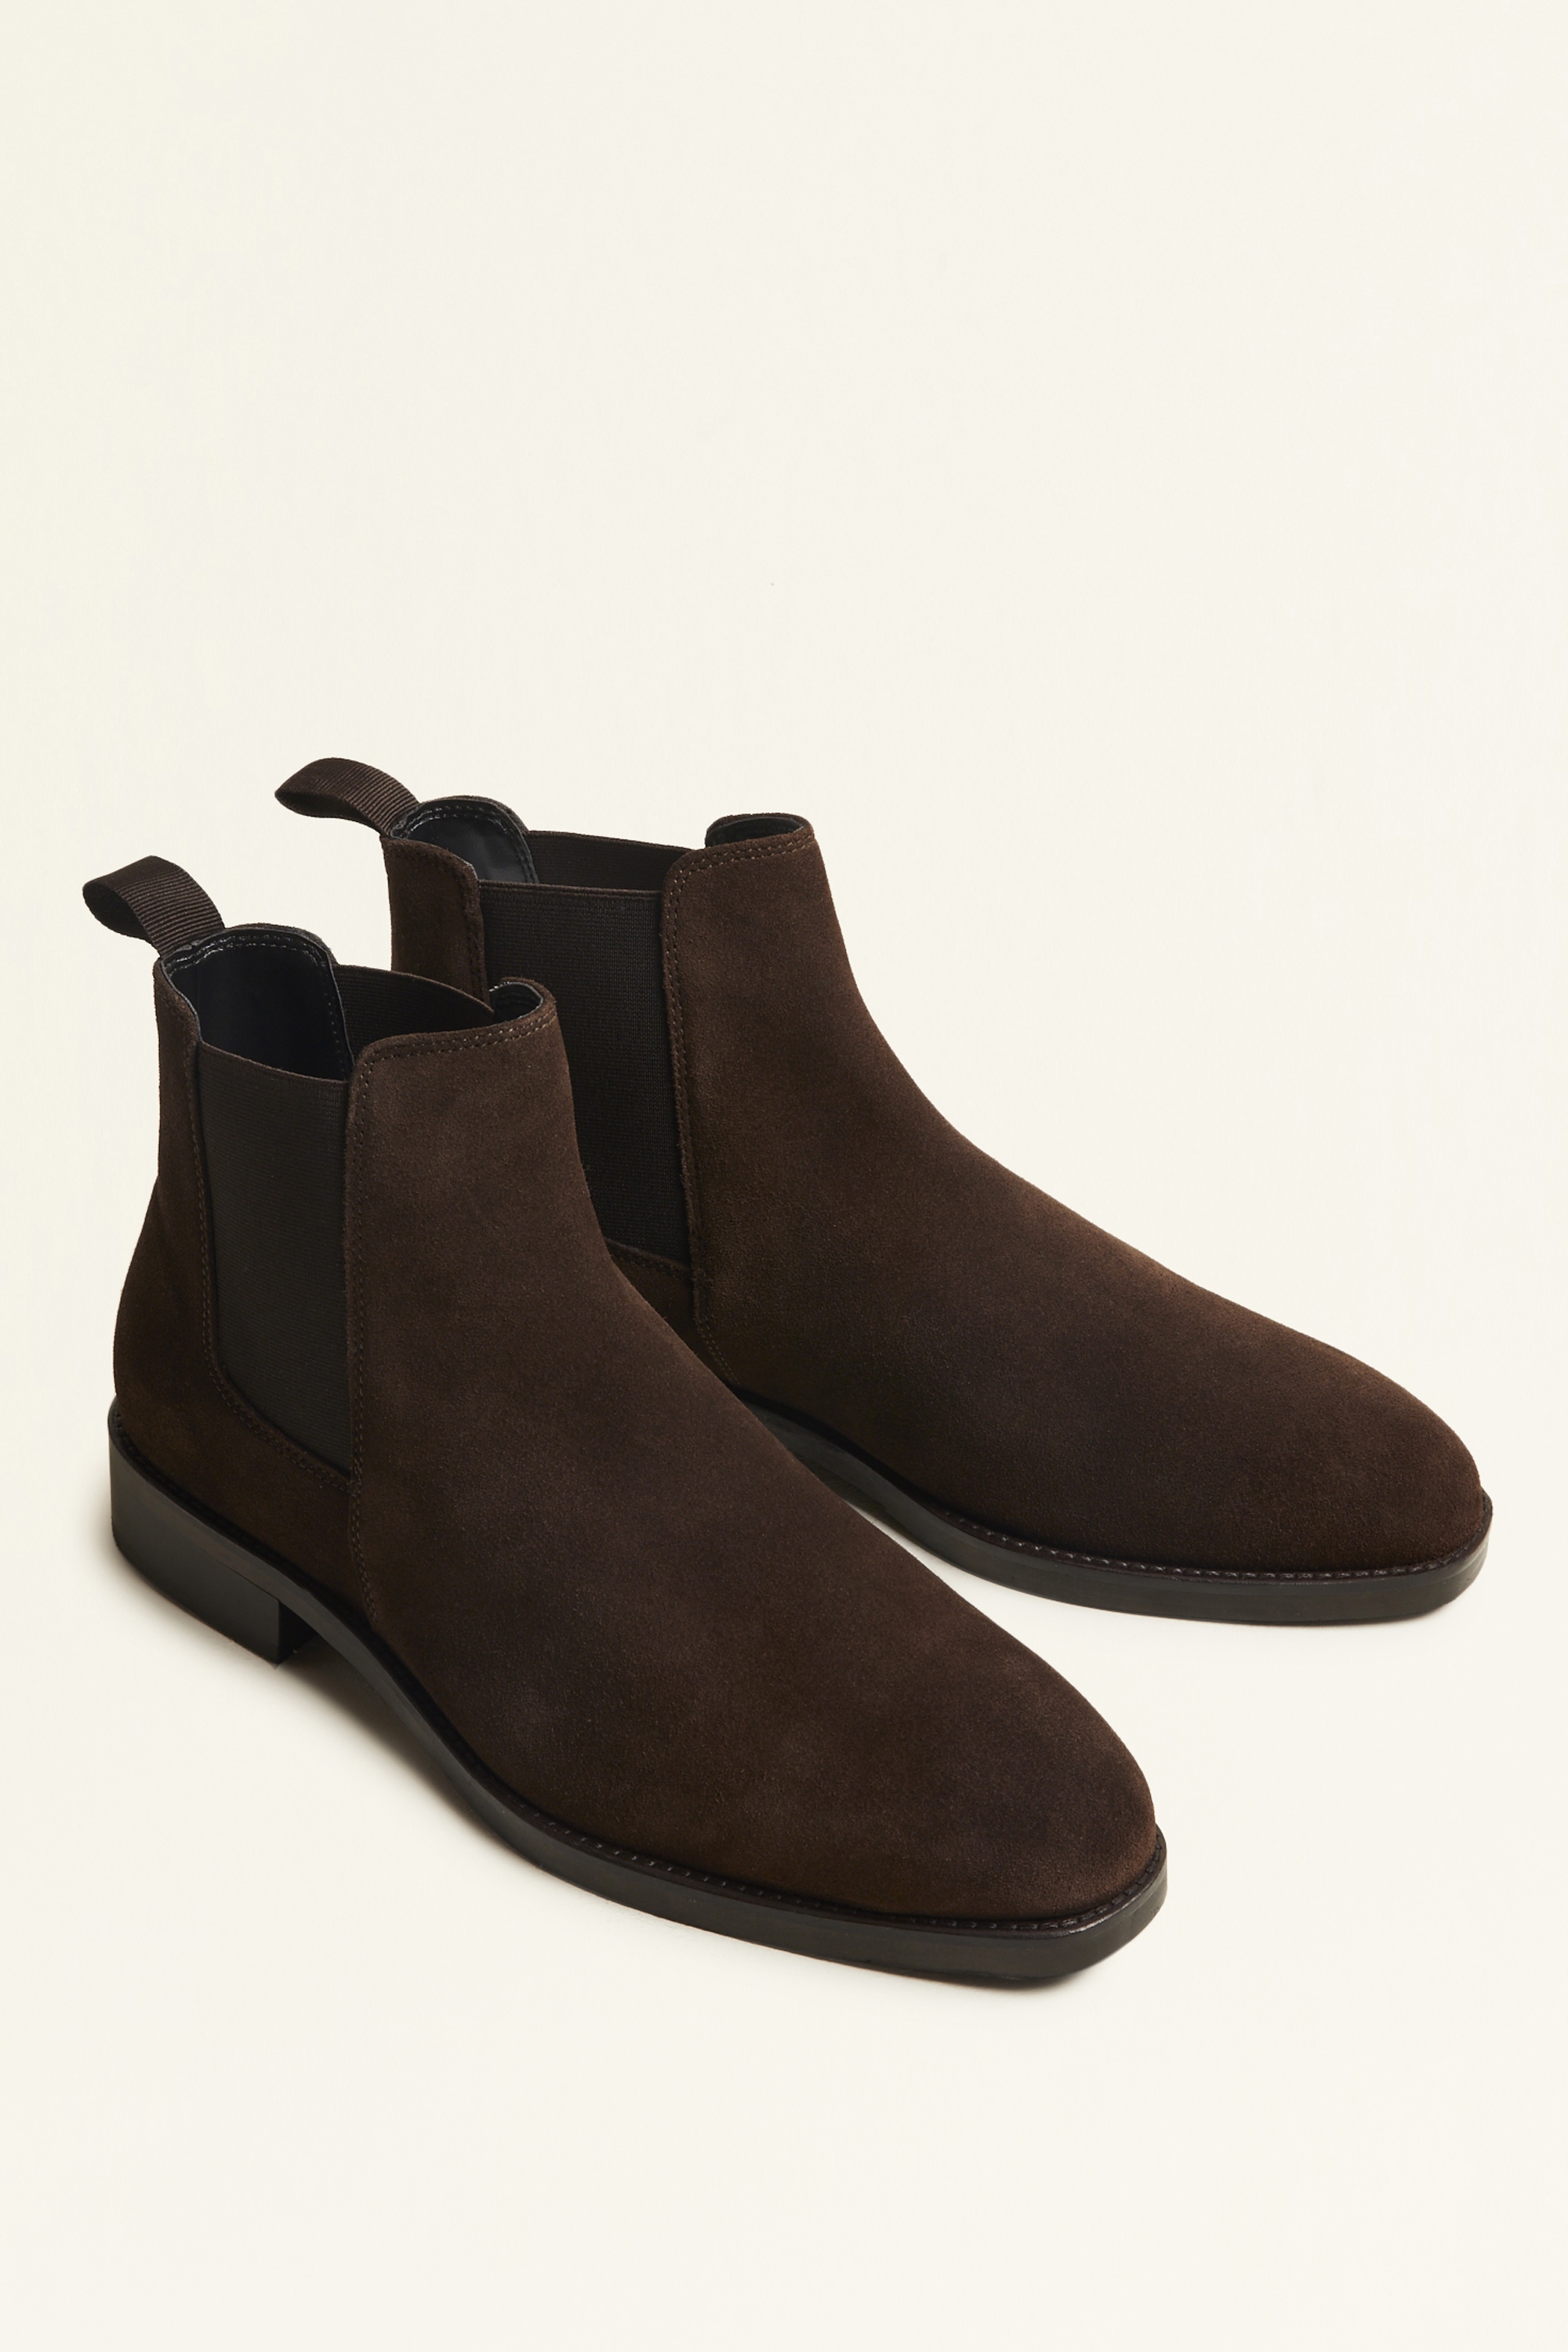 Seaford Brown Suede Boot